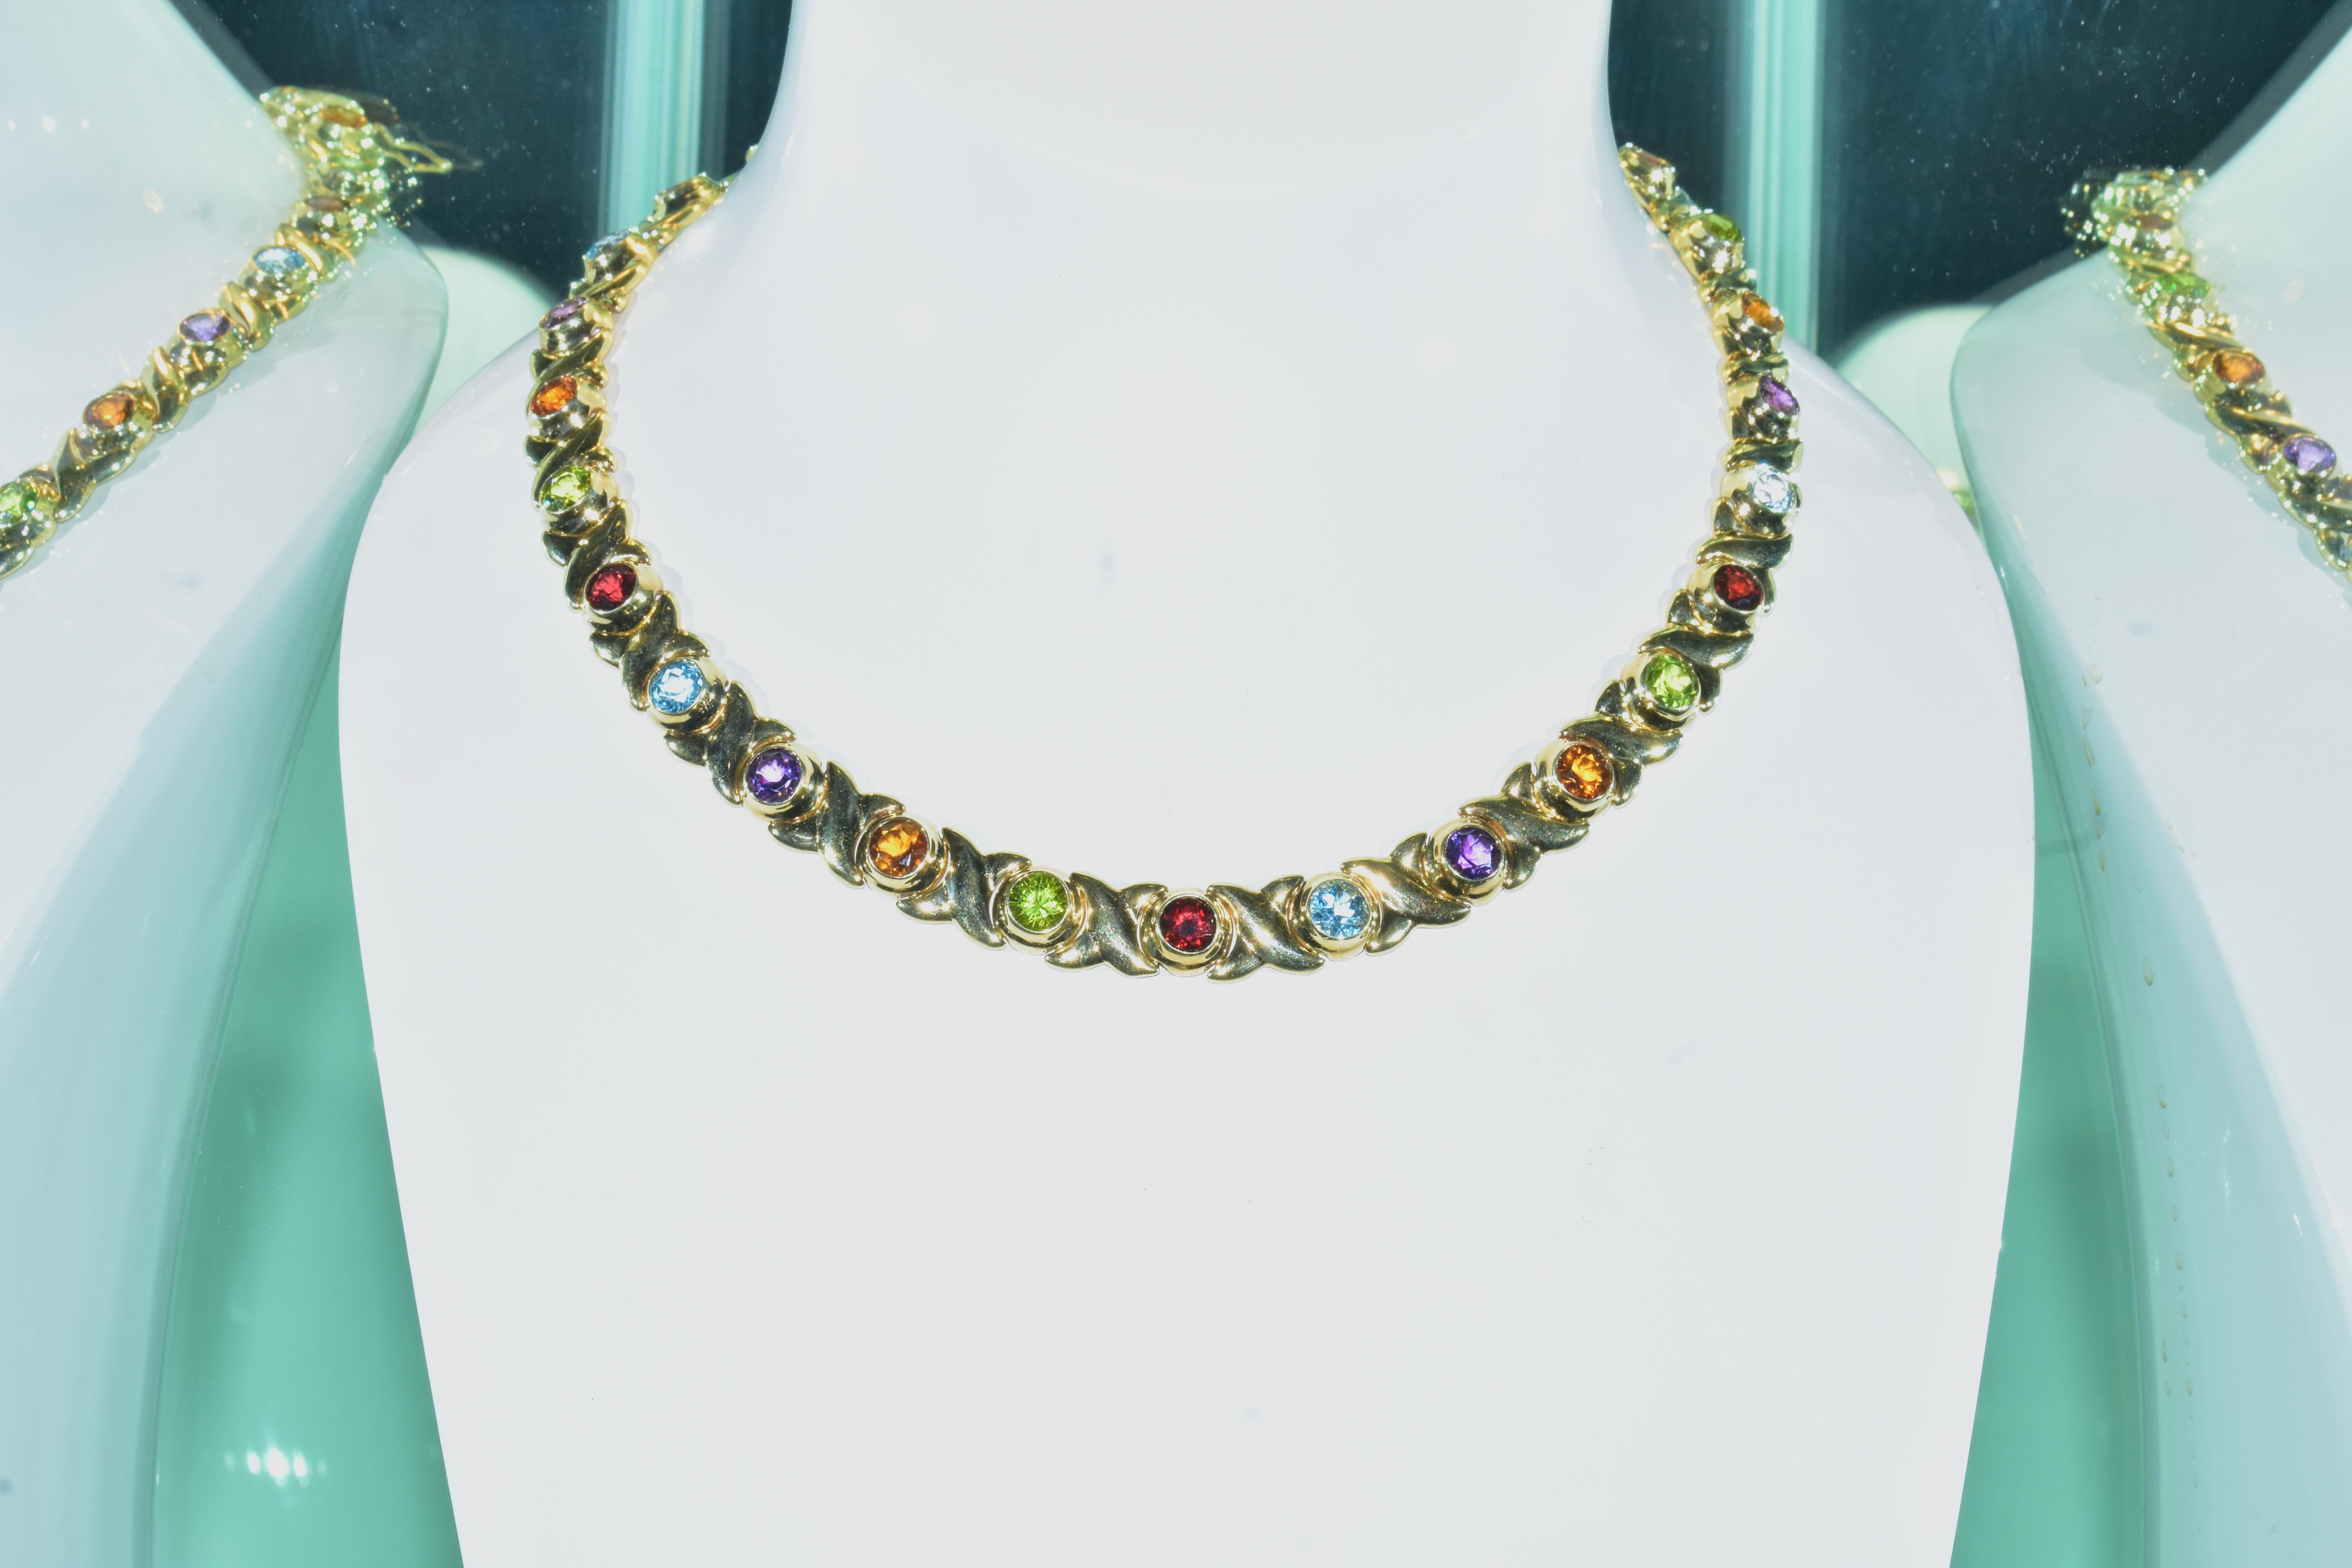 Gem Set Yellow Gold Vintage Necklace with Peridot, Amethyst, Citrine, and Garnet For Sale 4